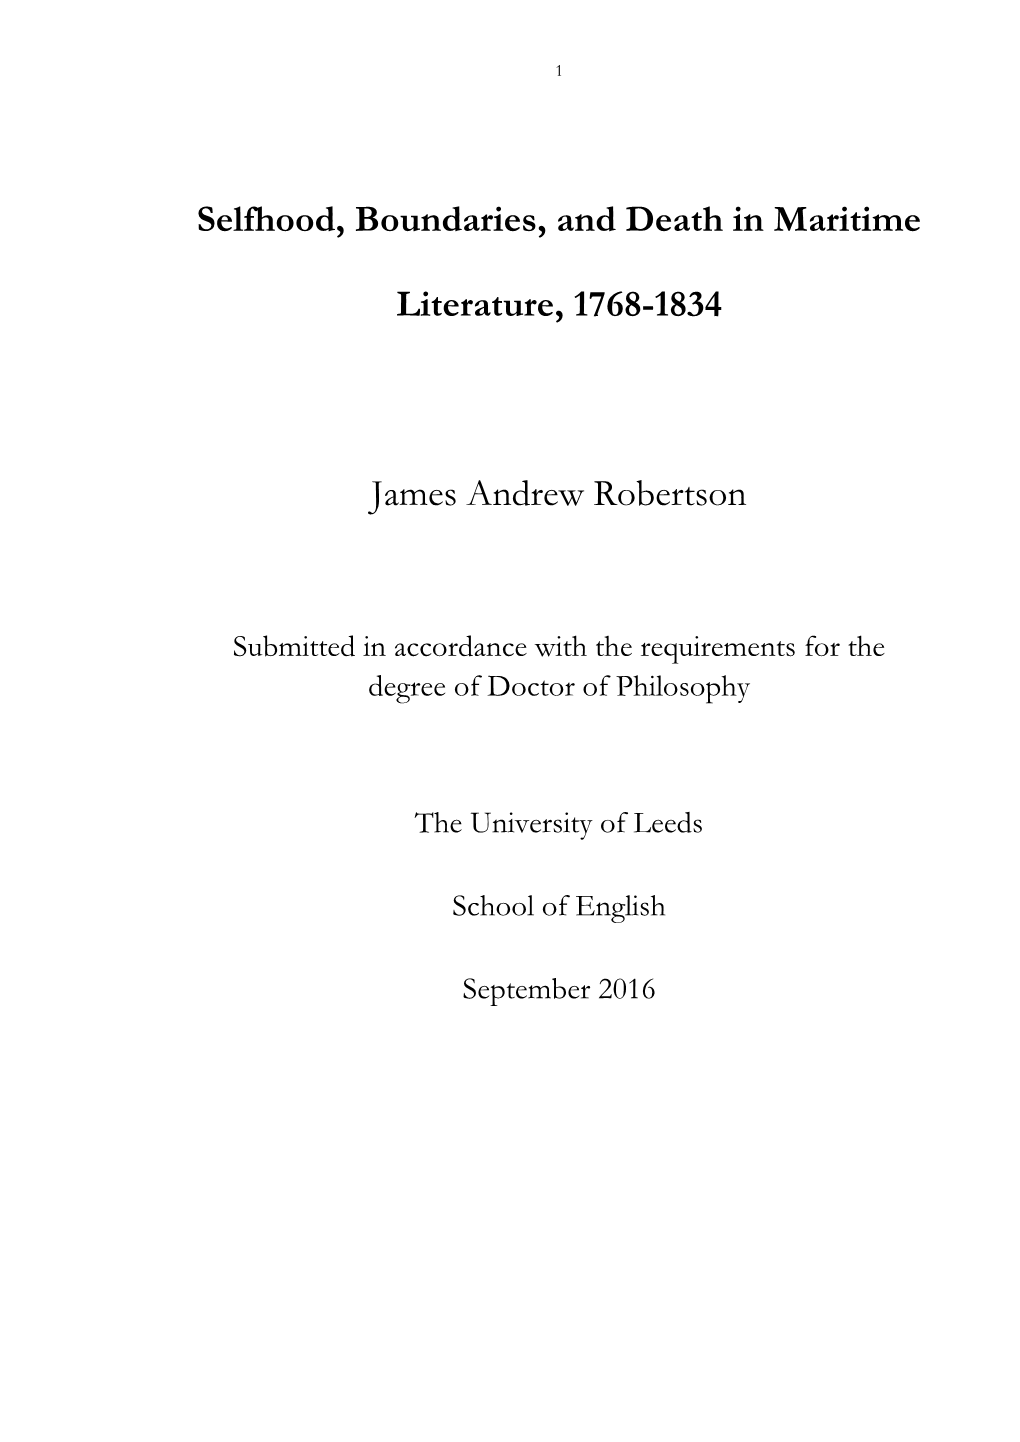 Selfhood, Boundaries, and Death in Maritime Literature, 1768-1834